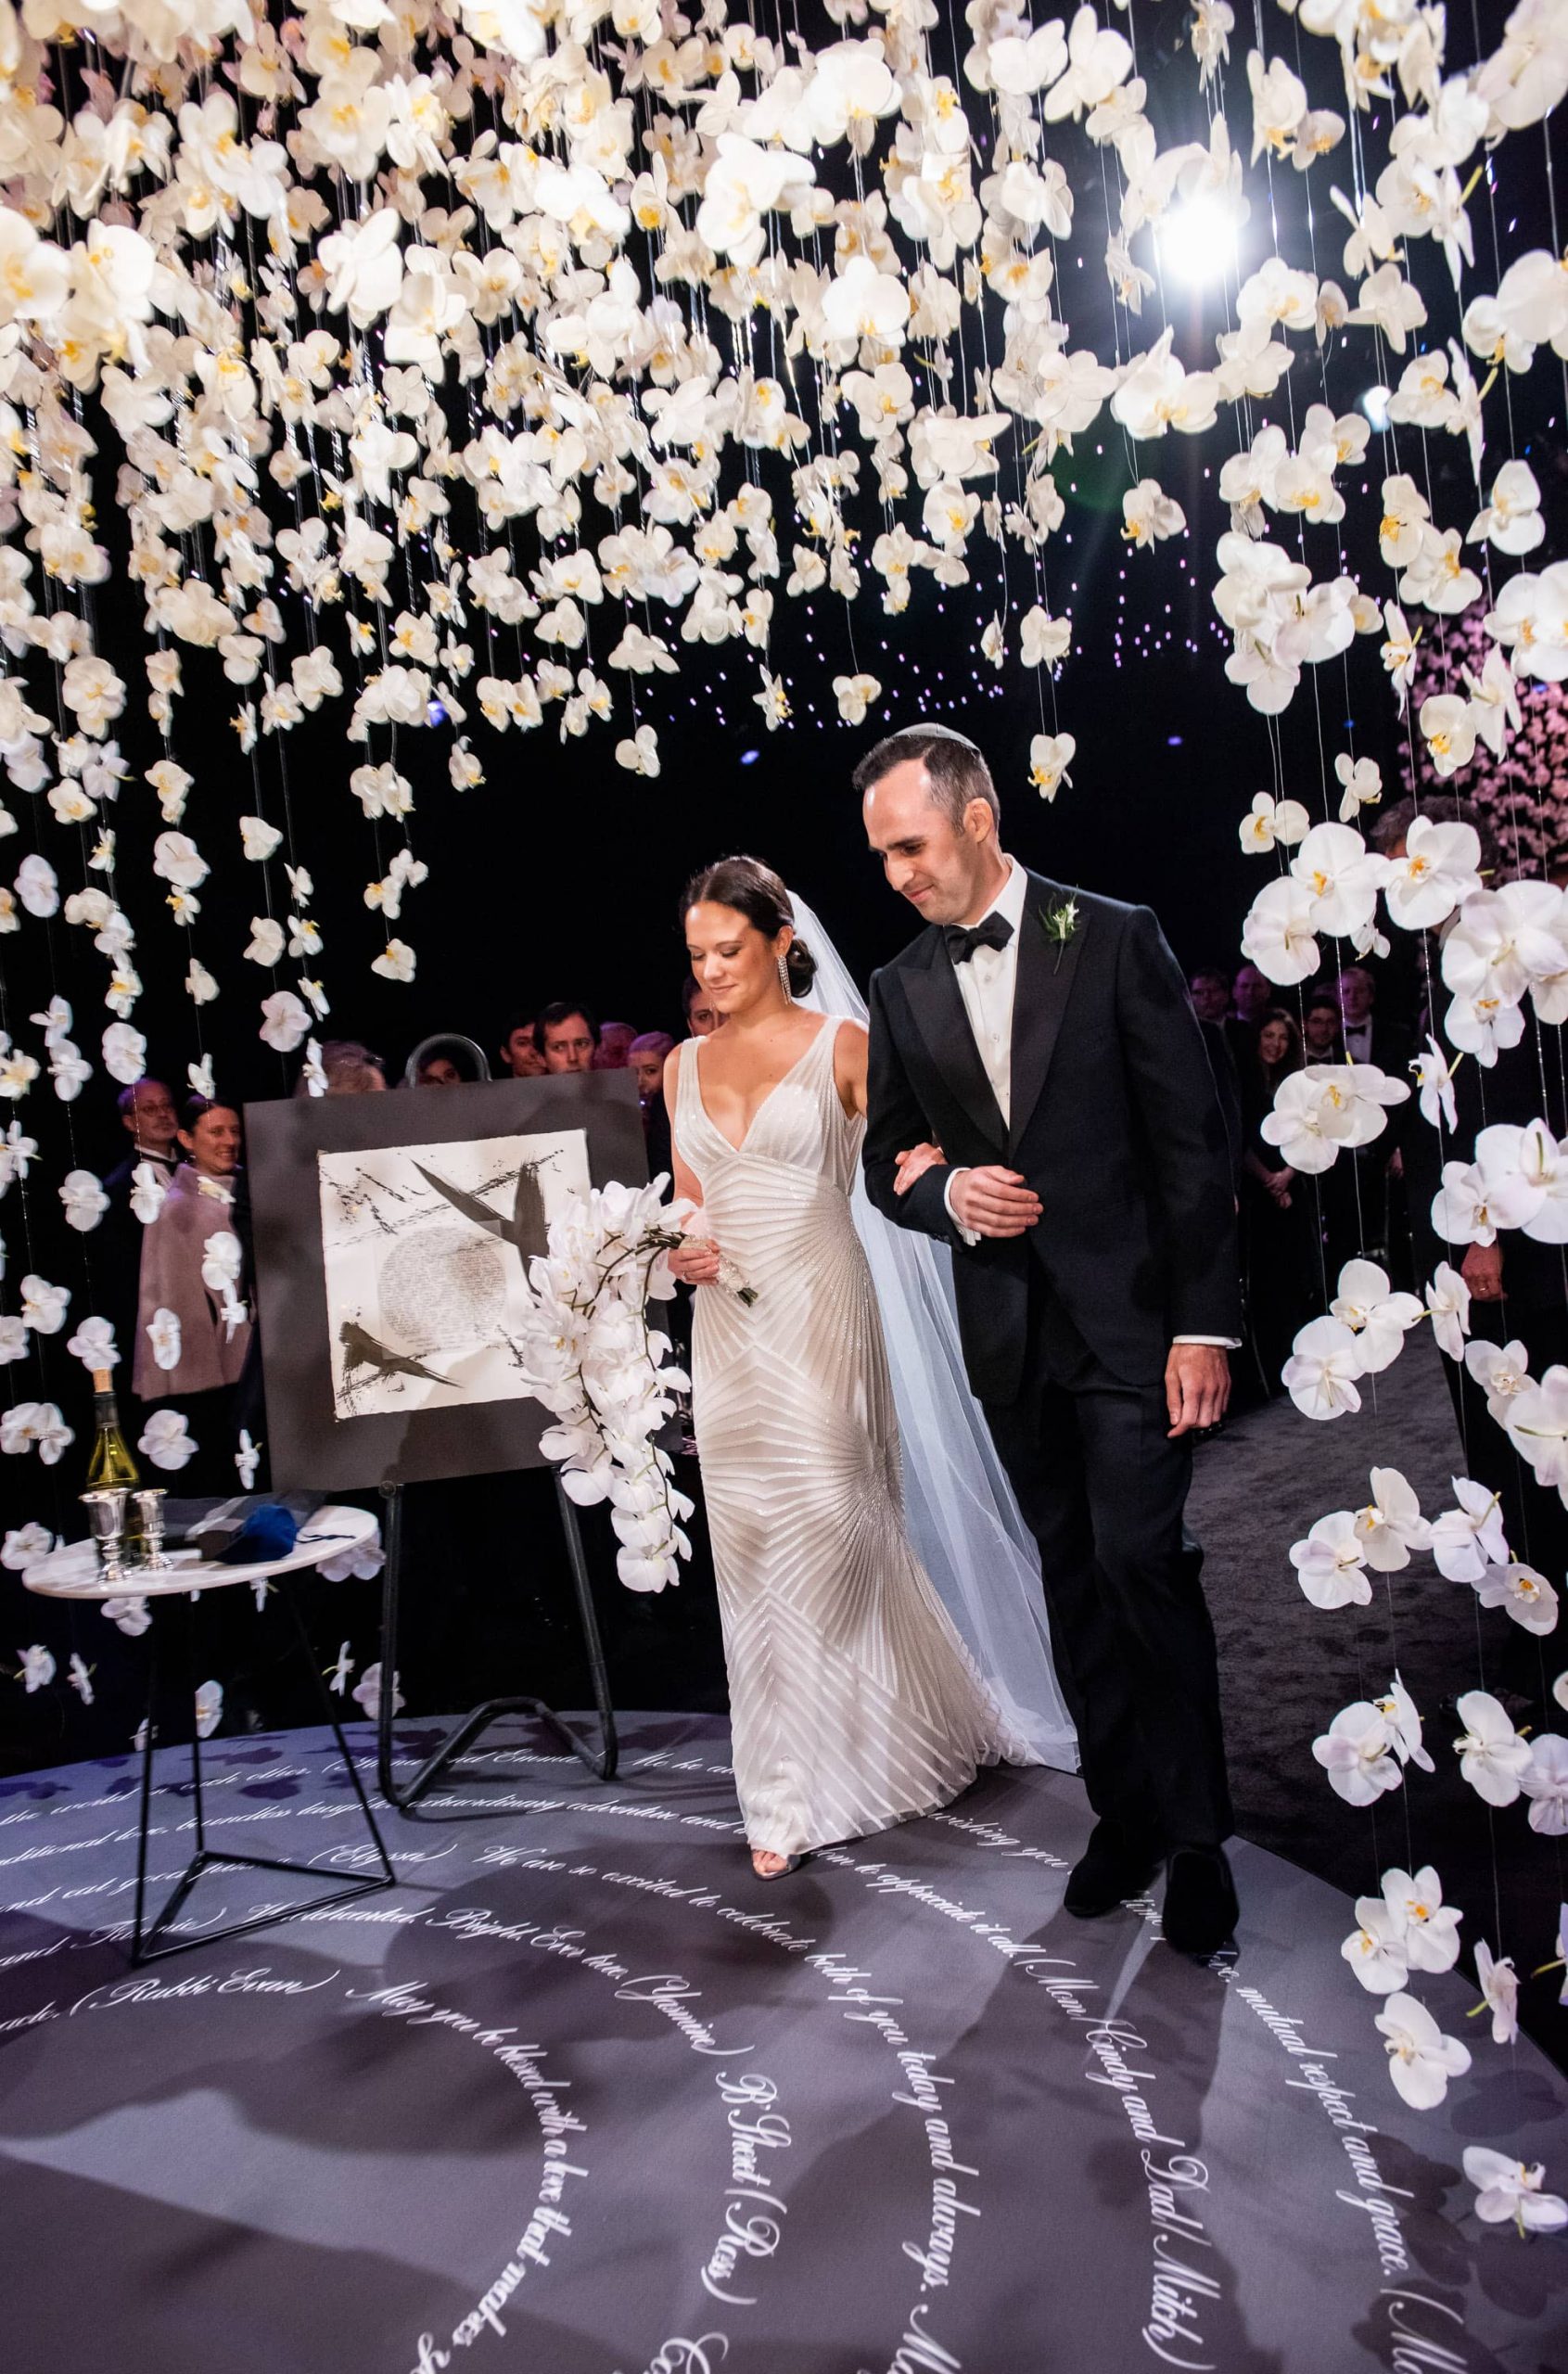 Bride and groom entering the chuppah made of hanging white orchards at this NYE wedding in New York City | Photo by Gruber Photo